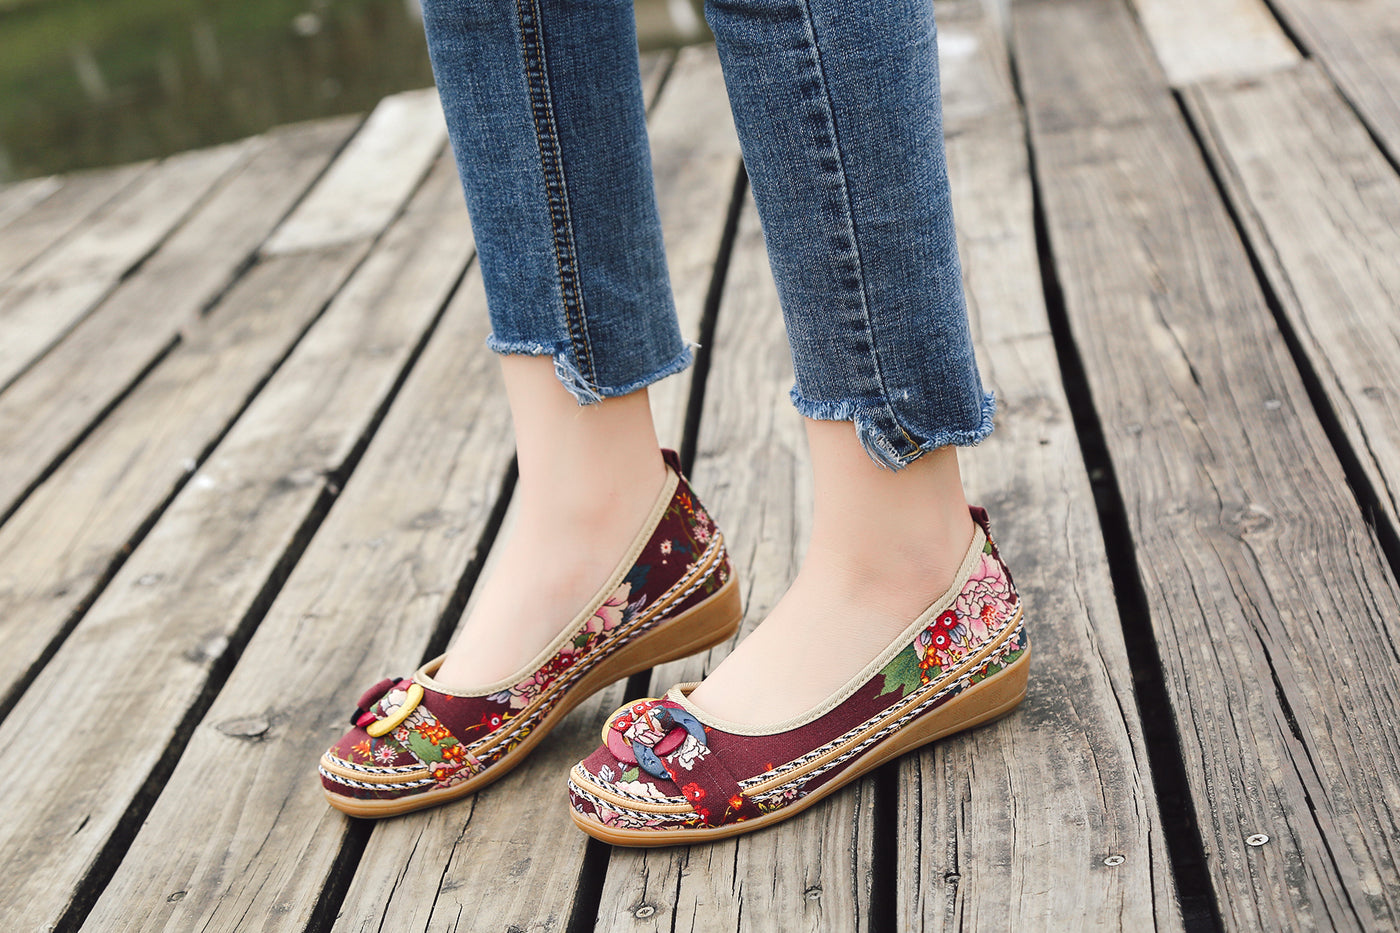 Bow Head Buddha Beads Round Toe Ankle Flat Shoes Boat Shoes - Cactus Rose